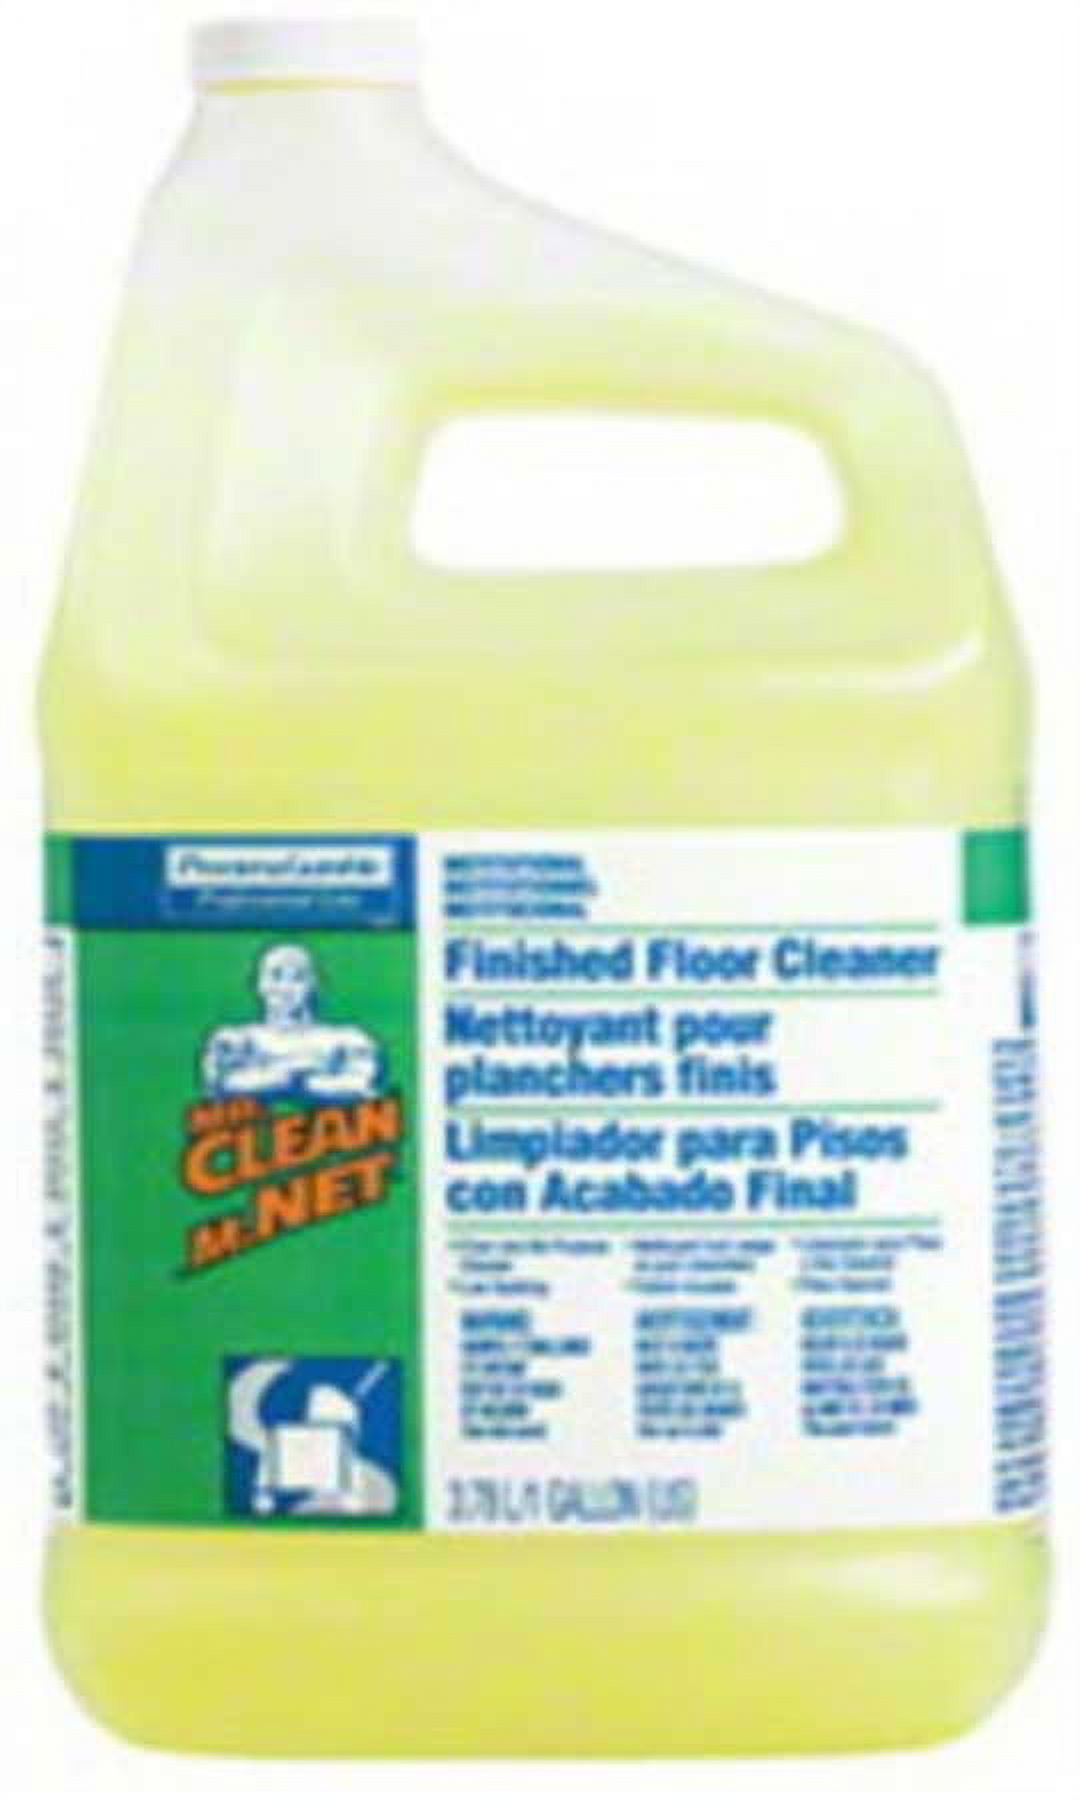 Mr. Clean Professional Finished Floor Cleaner